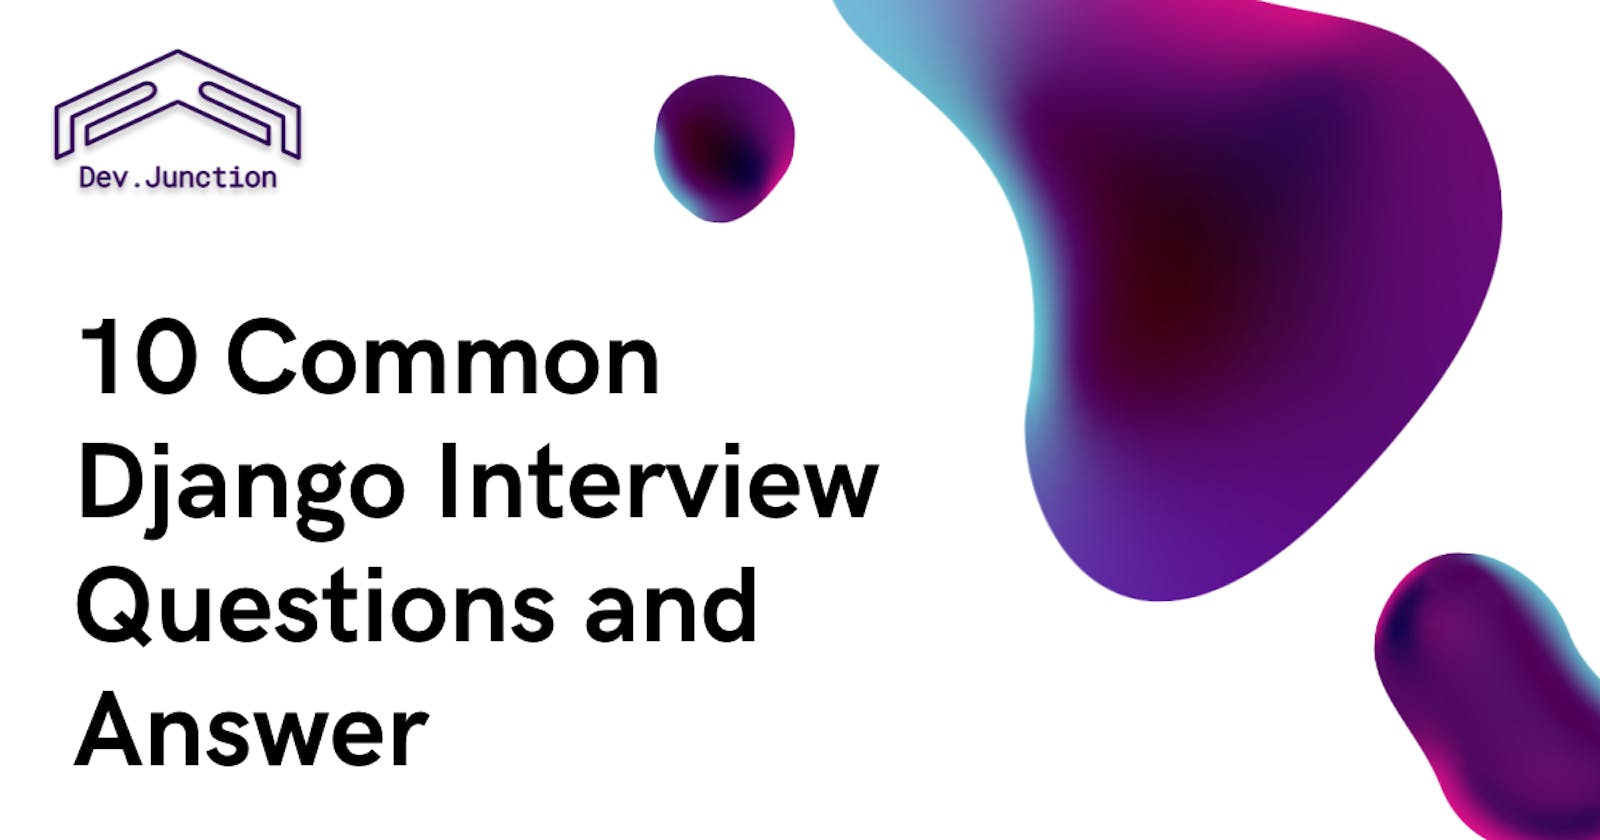 10 Common Django Interview Questions and Answers